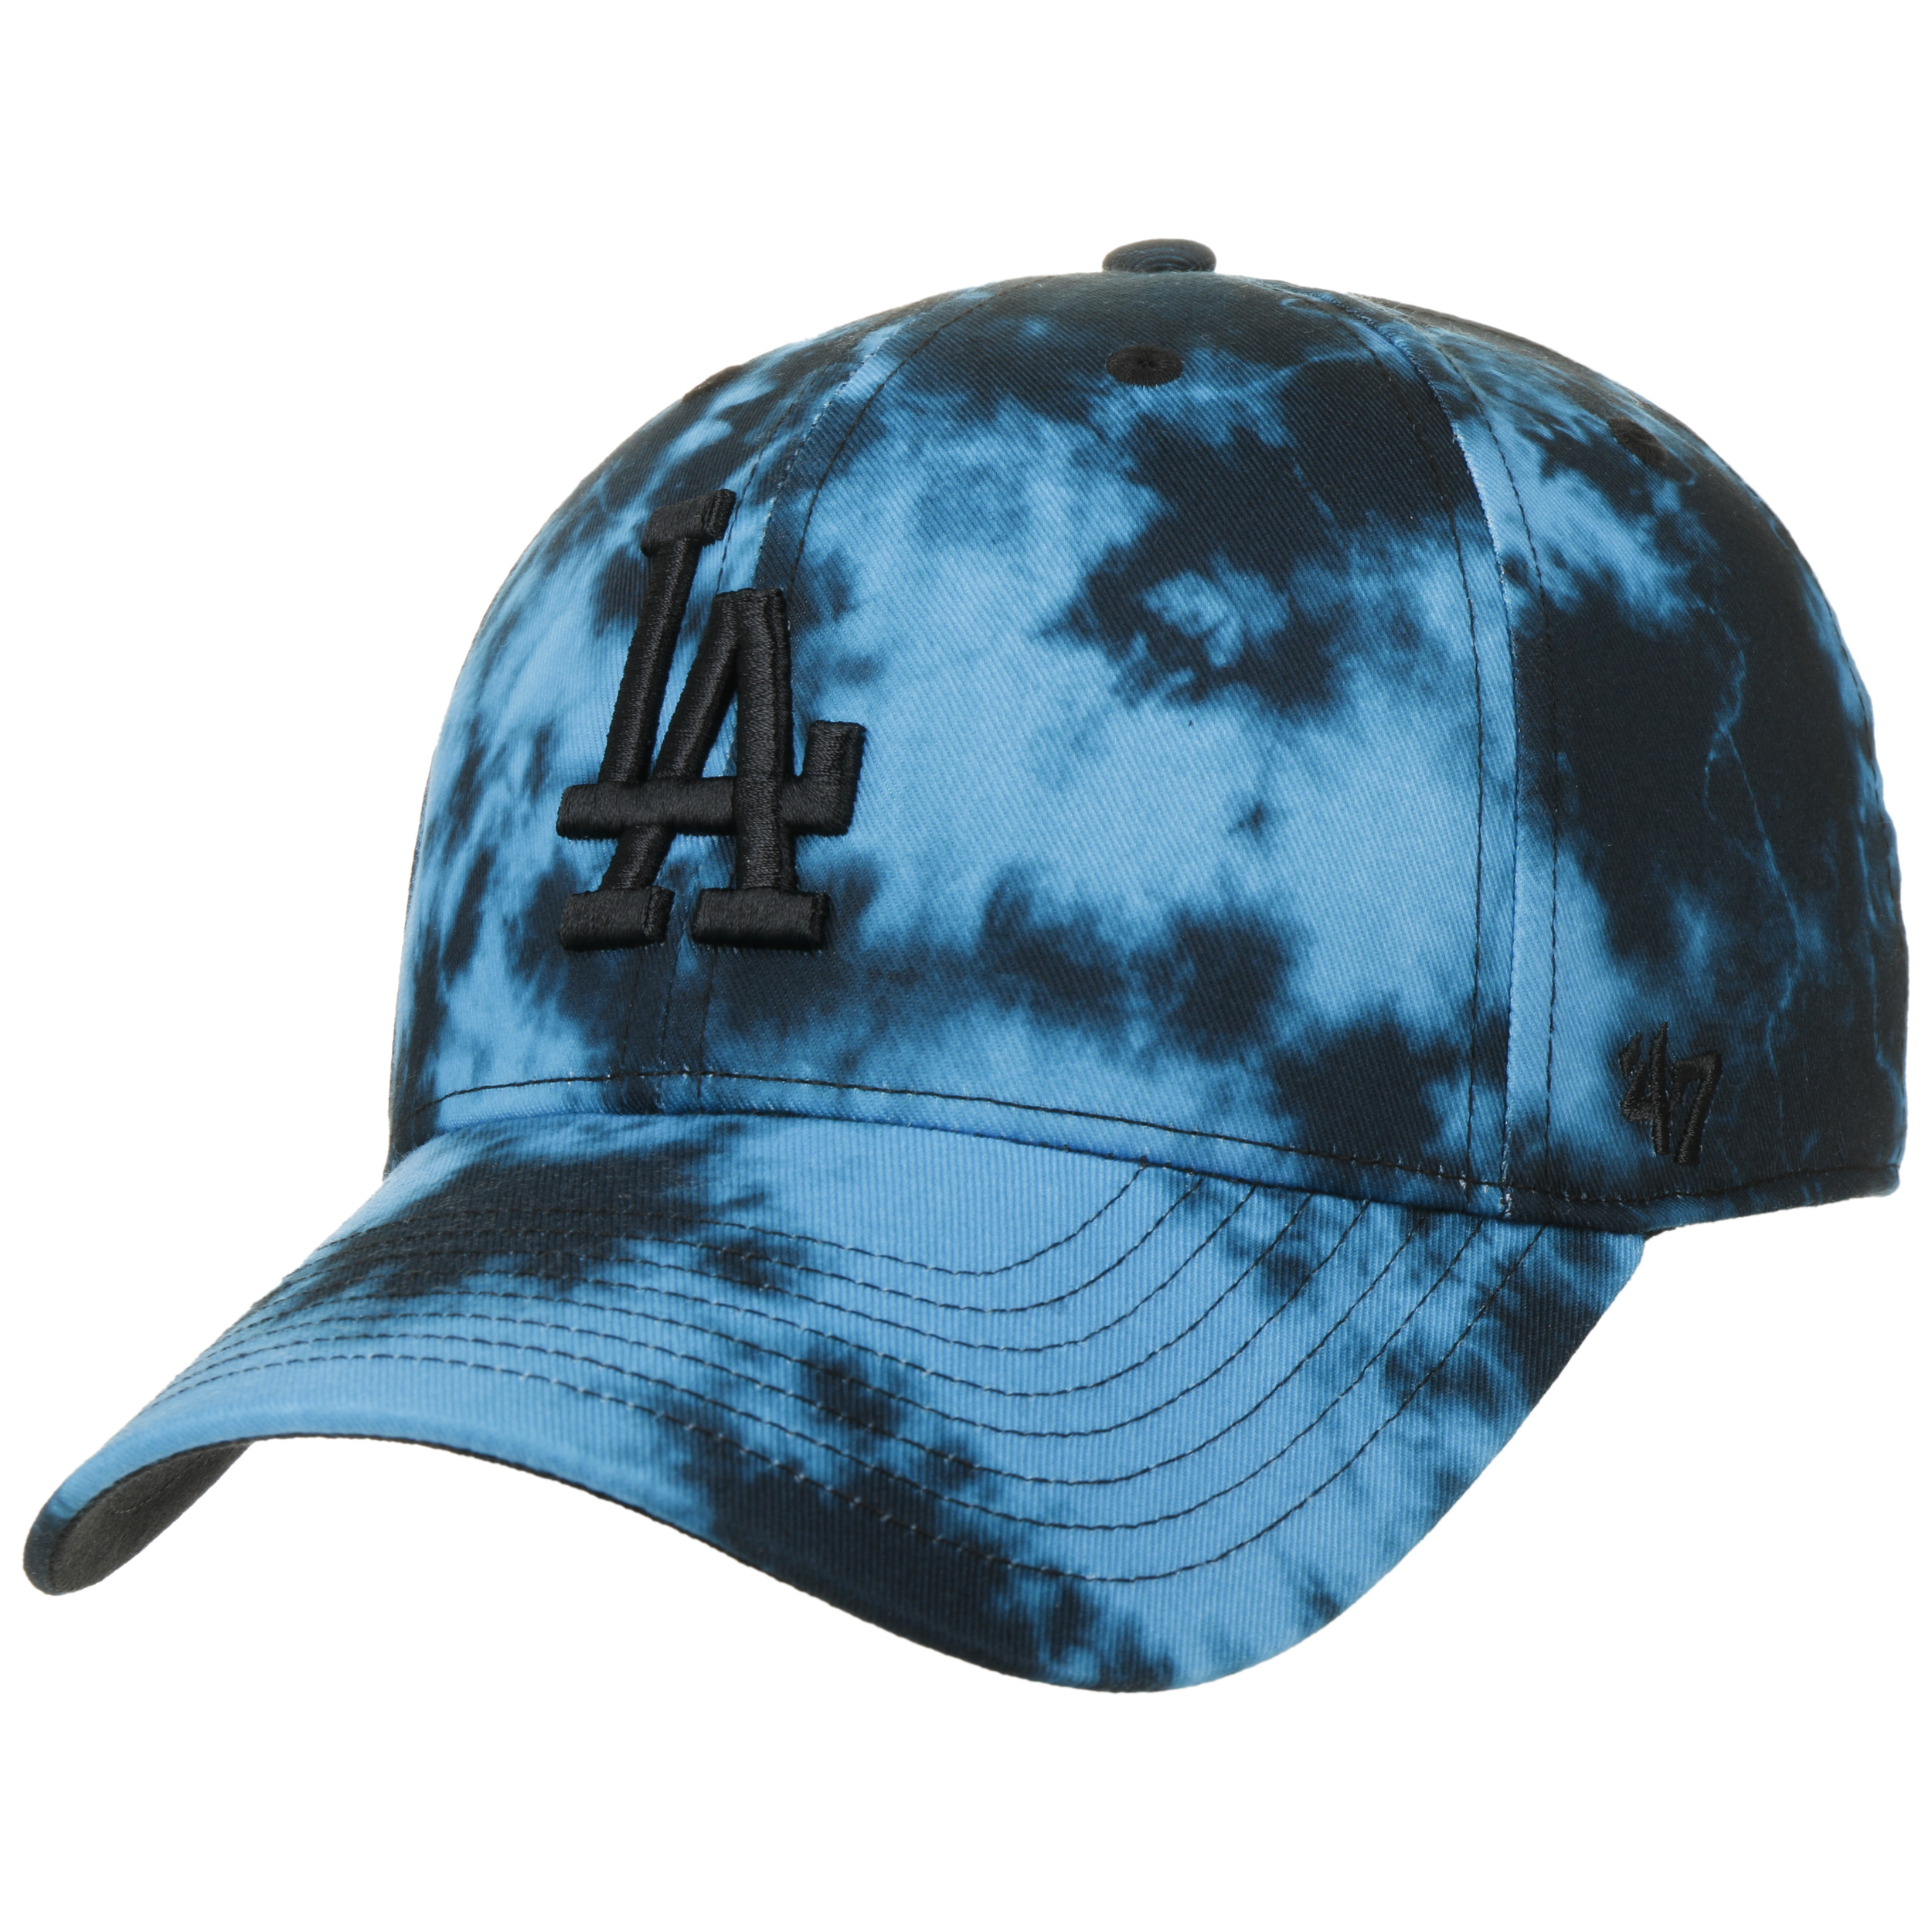 MLB Dodgers Tinted Snapback Cap by 47 Brand --> Shop Hats, Beanies & Caps  online ▷ Hatshopping